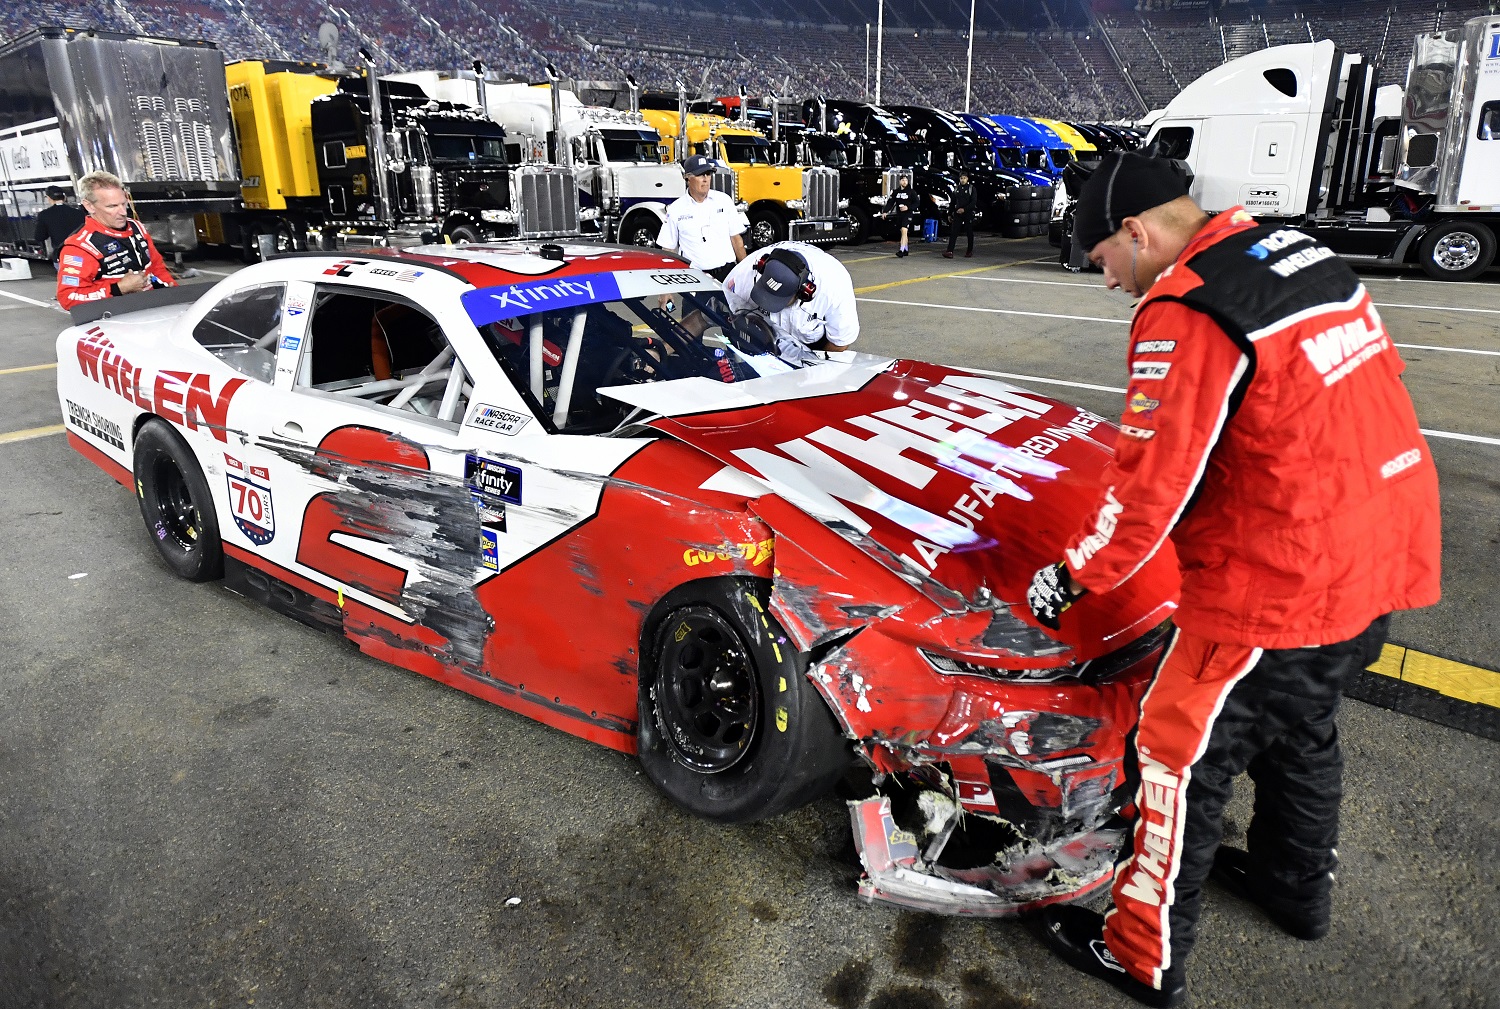 Crew members attend the No. 2 Chevrolet of Sheldon Creed after an on-track incident during the NASCAR Xfinity Series Food City 300 at Bristol Motor Speedway on Sept. 16, 2022.